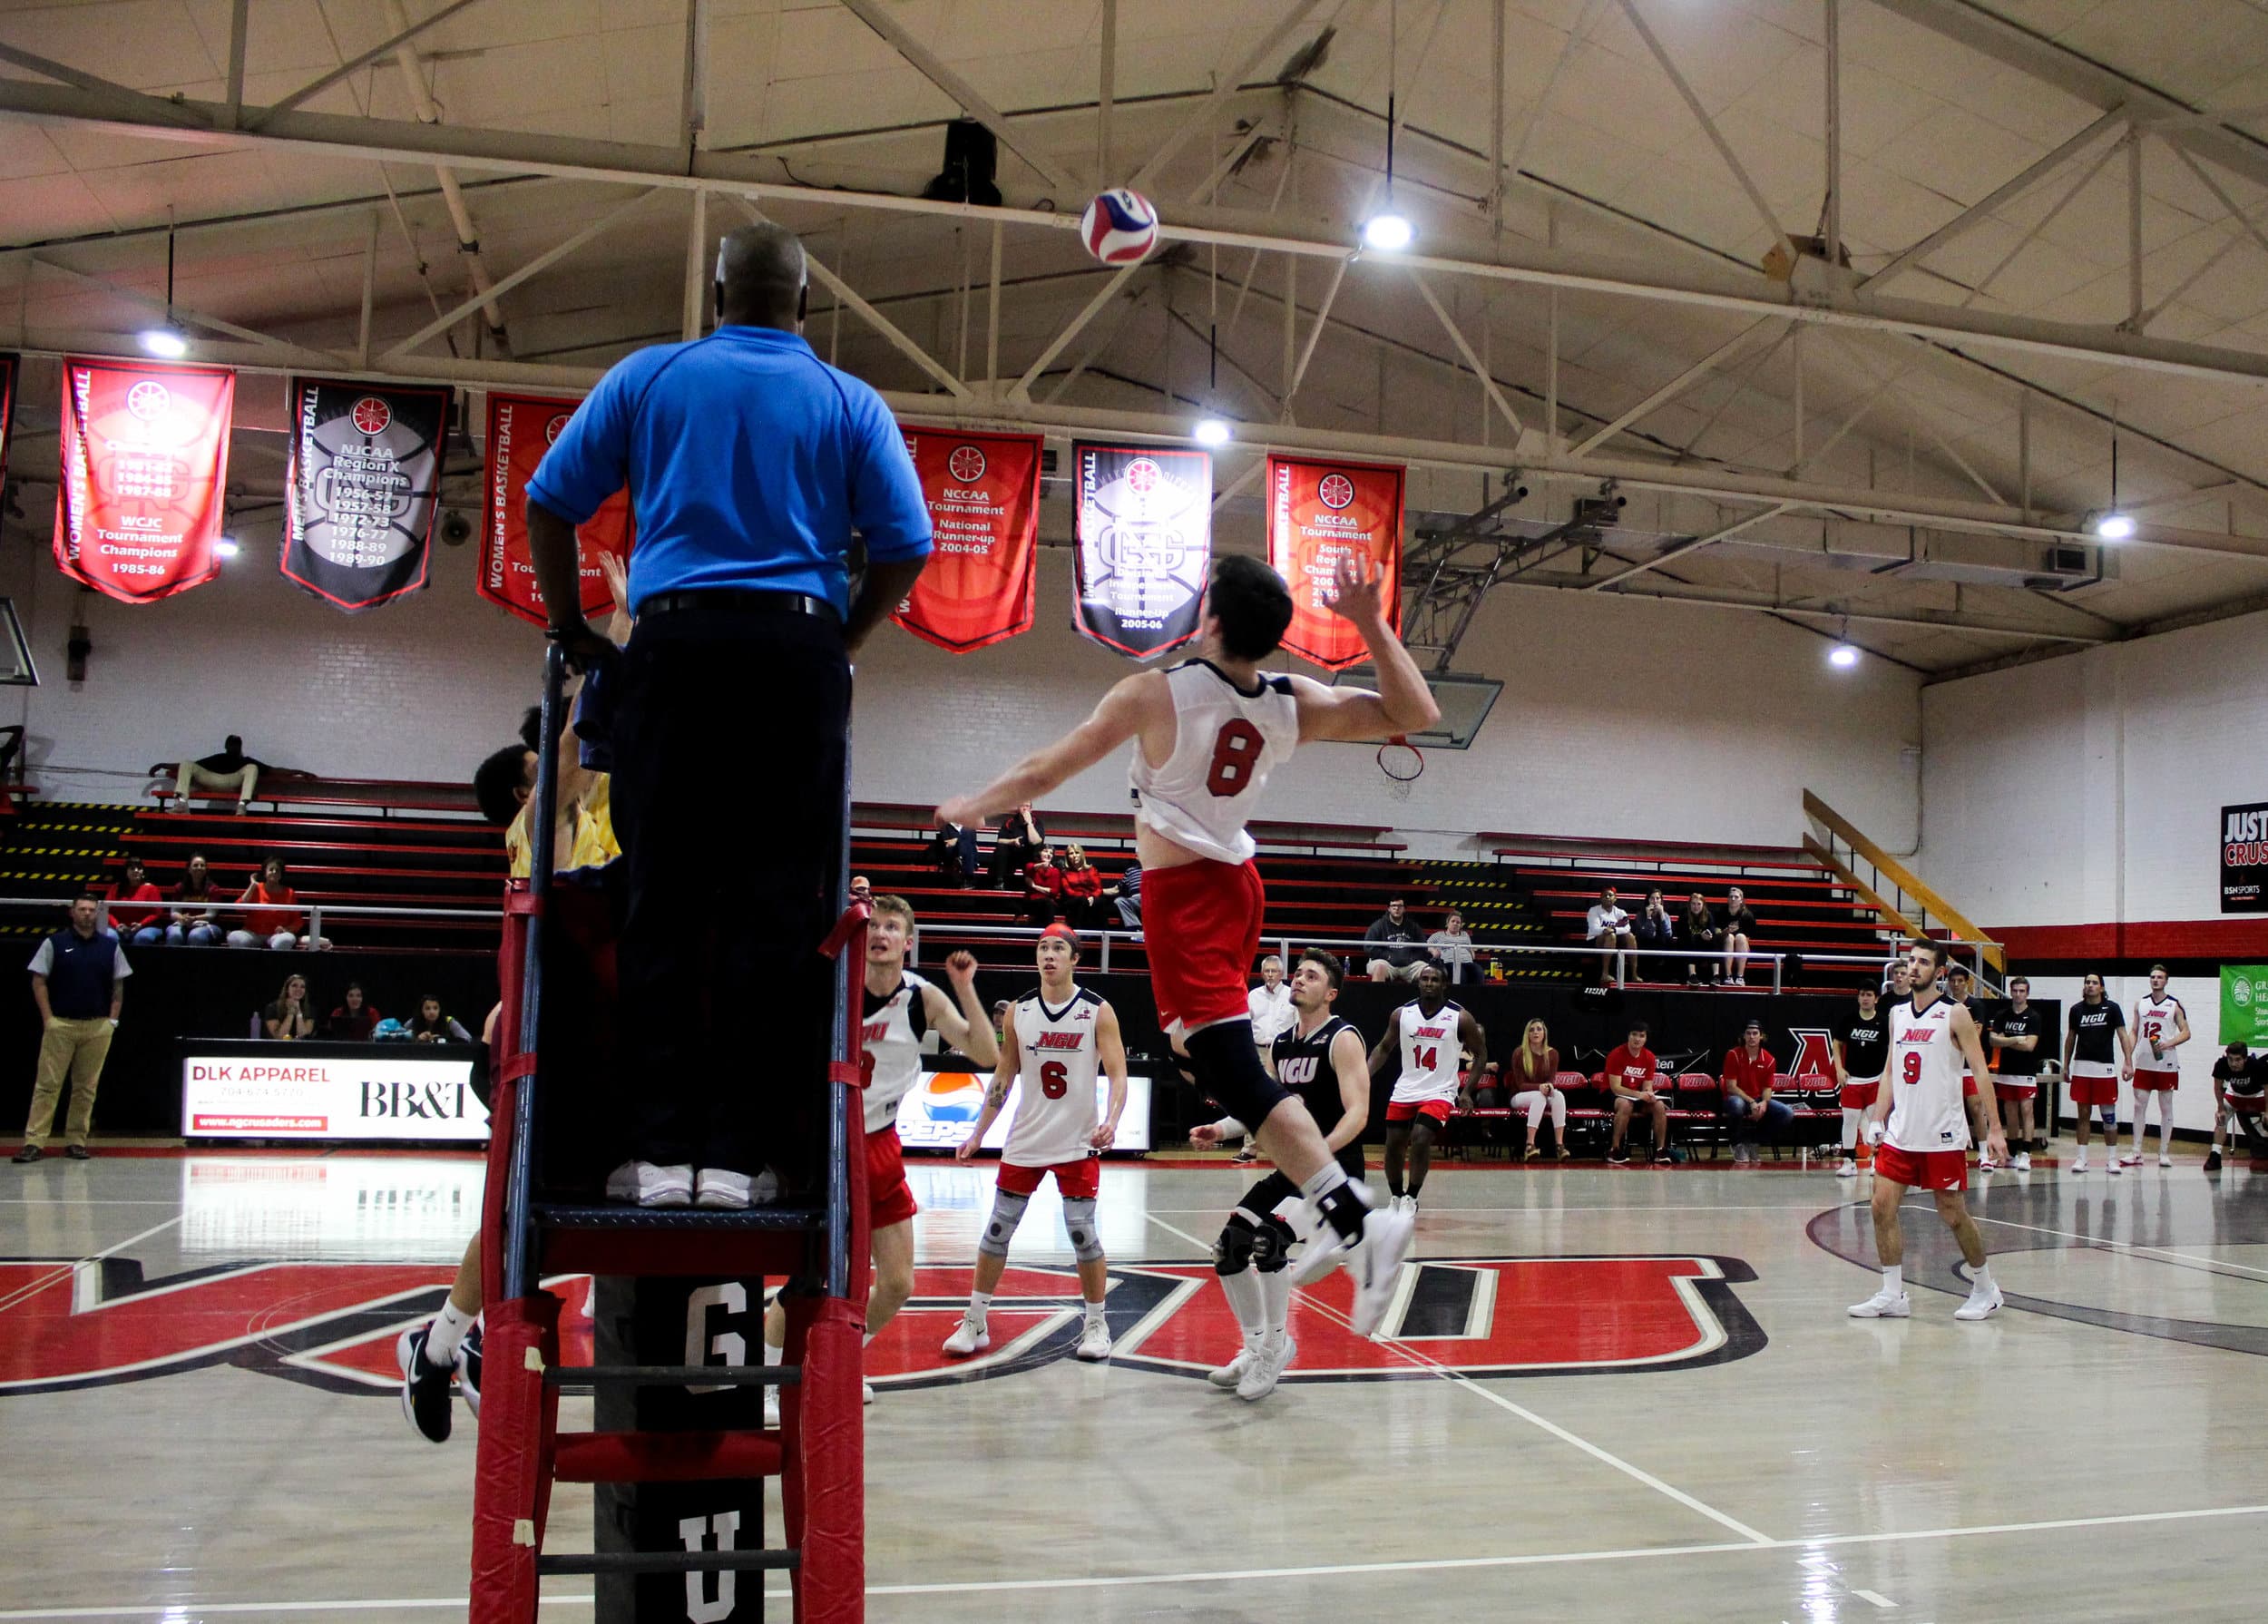 Jackson Gilbert (8) jumps to hit the ball over the net past the opposing teams players